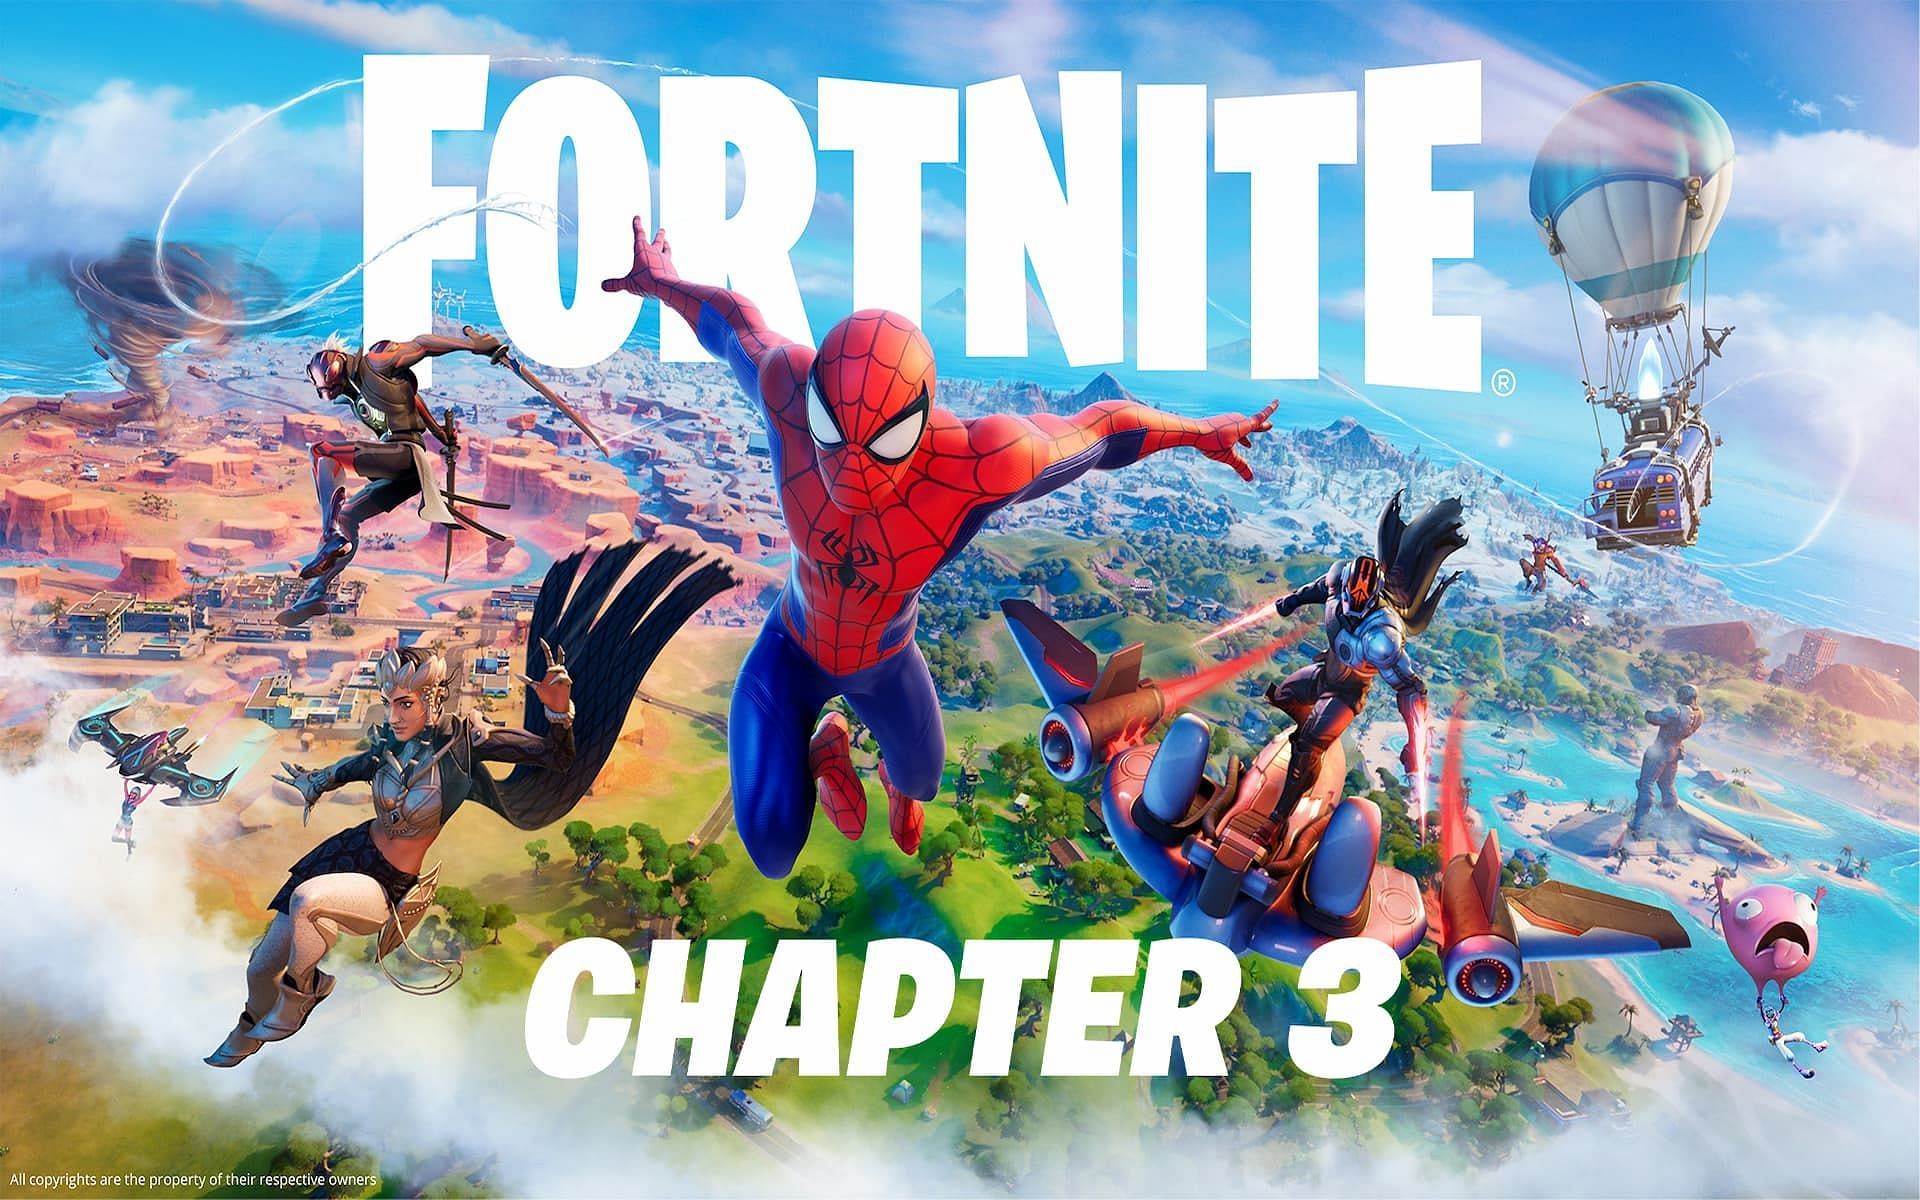 The promotional image for Chapter 3 Season 1 (Image via Epic Games)